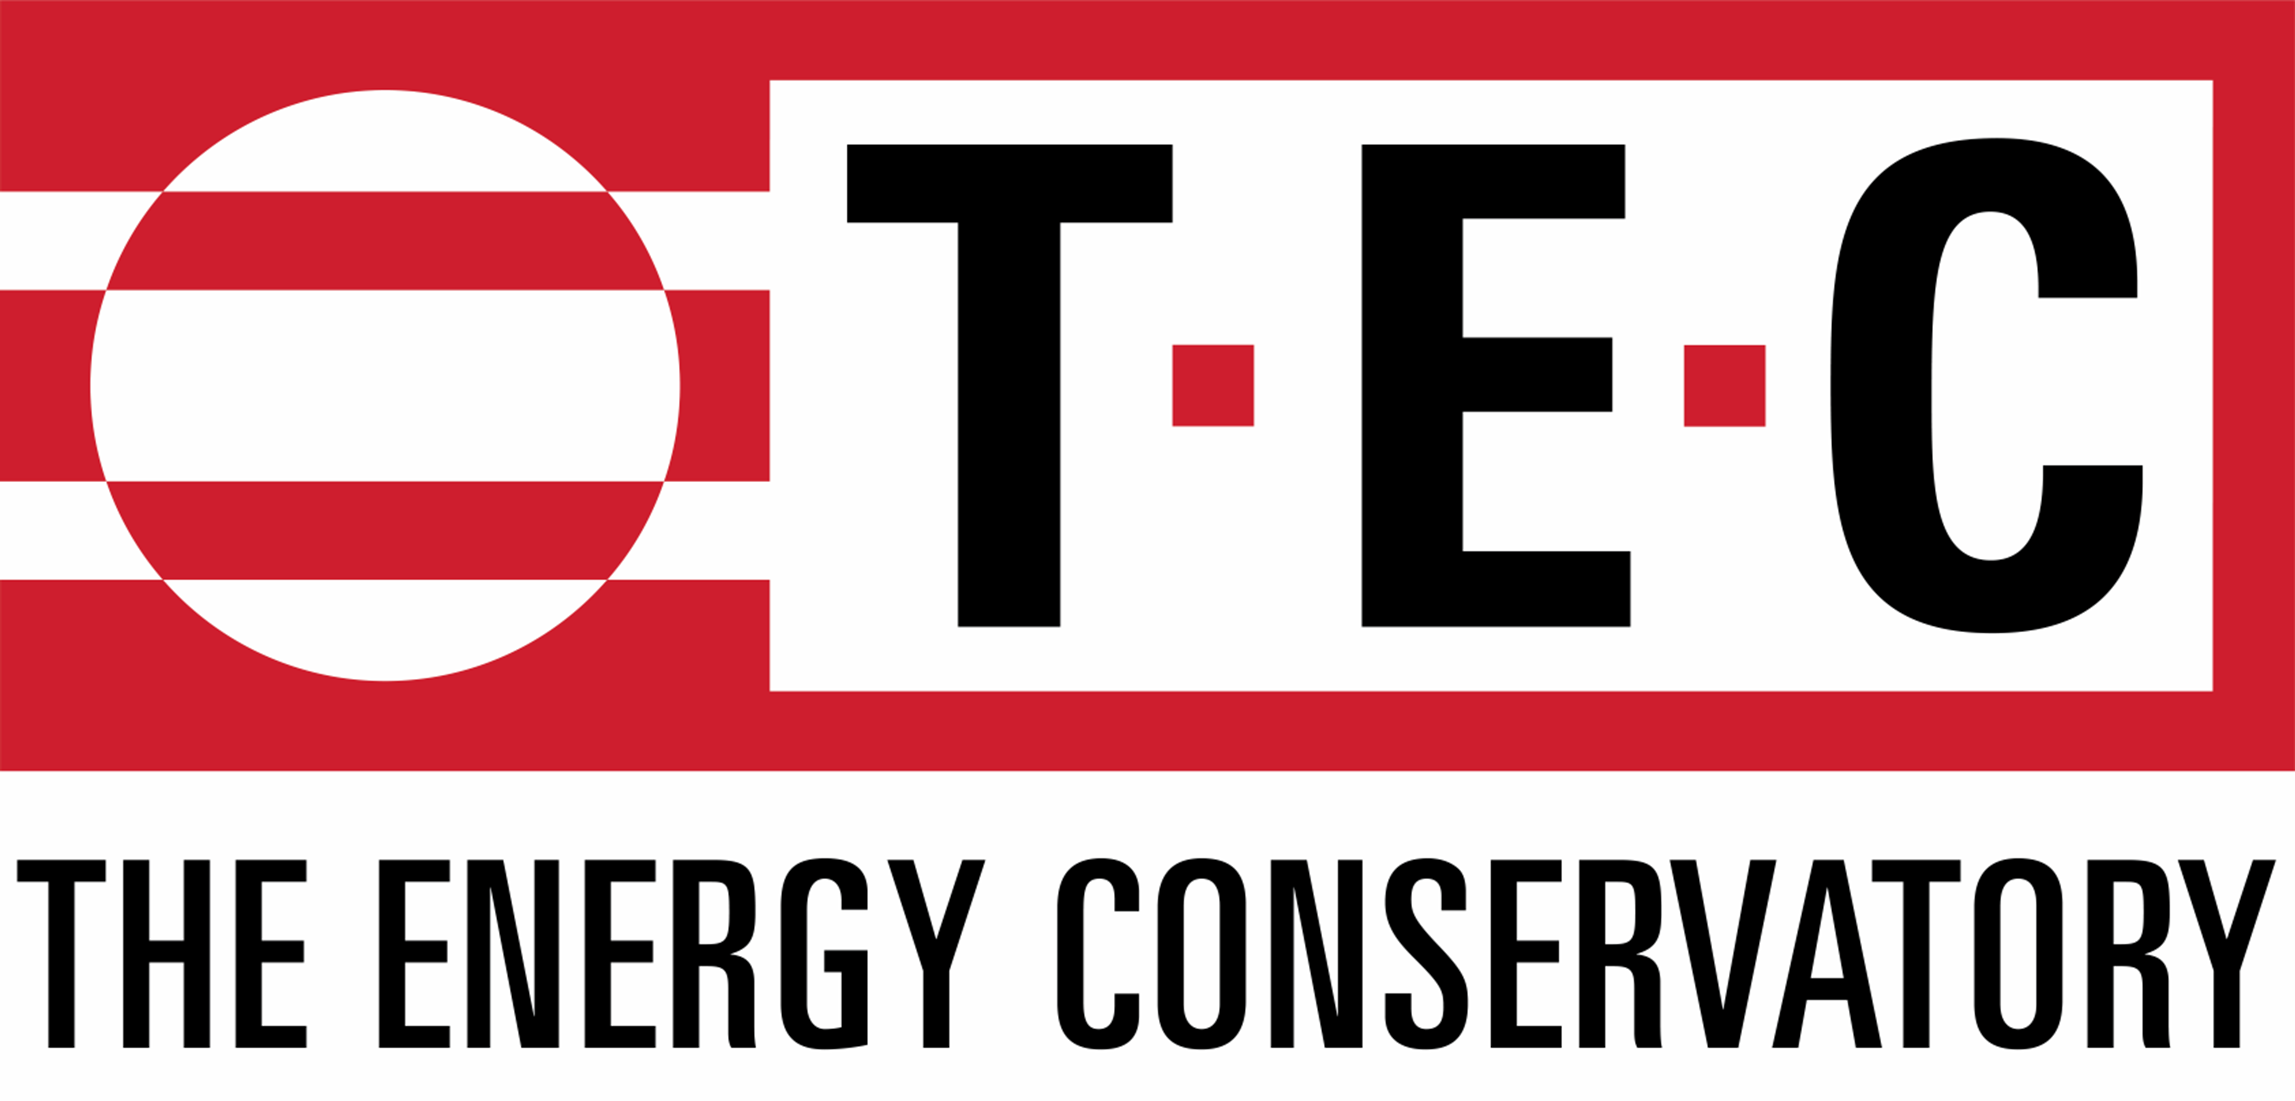 The Energy Conservatory